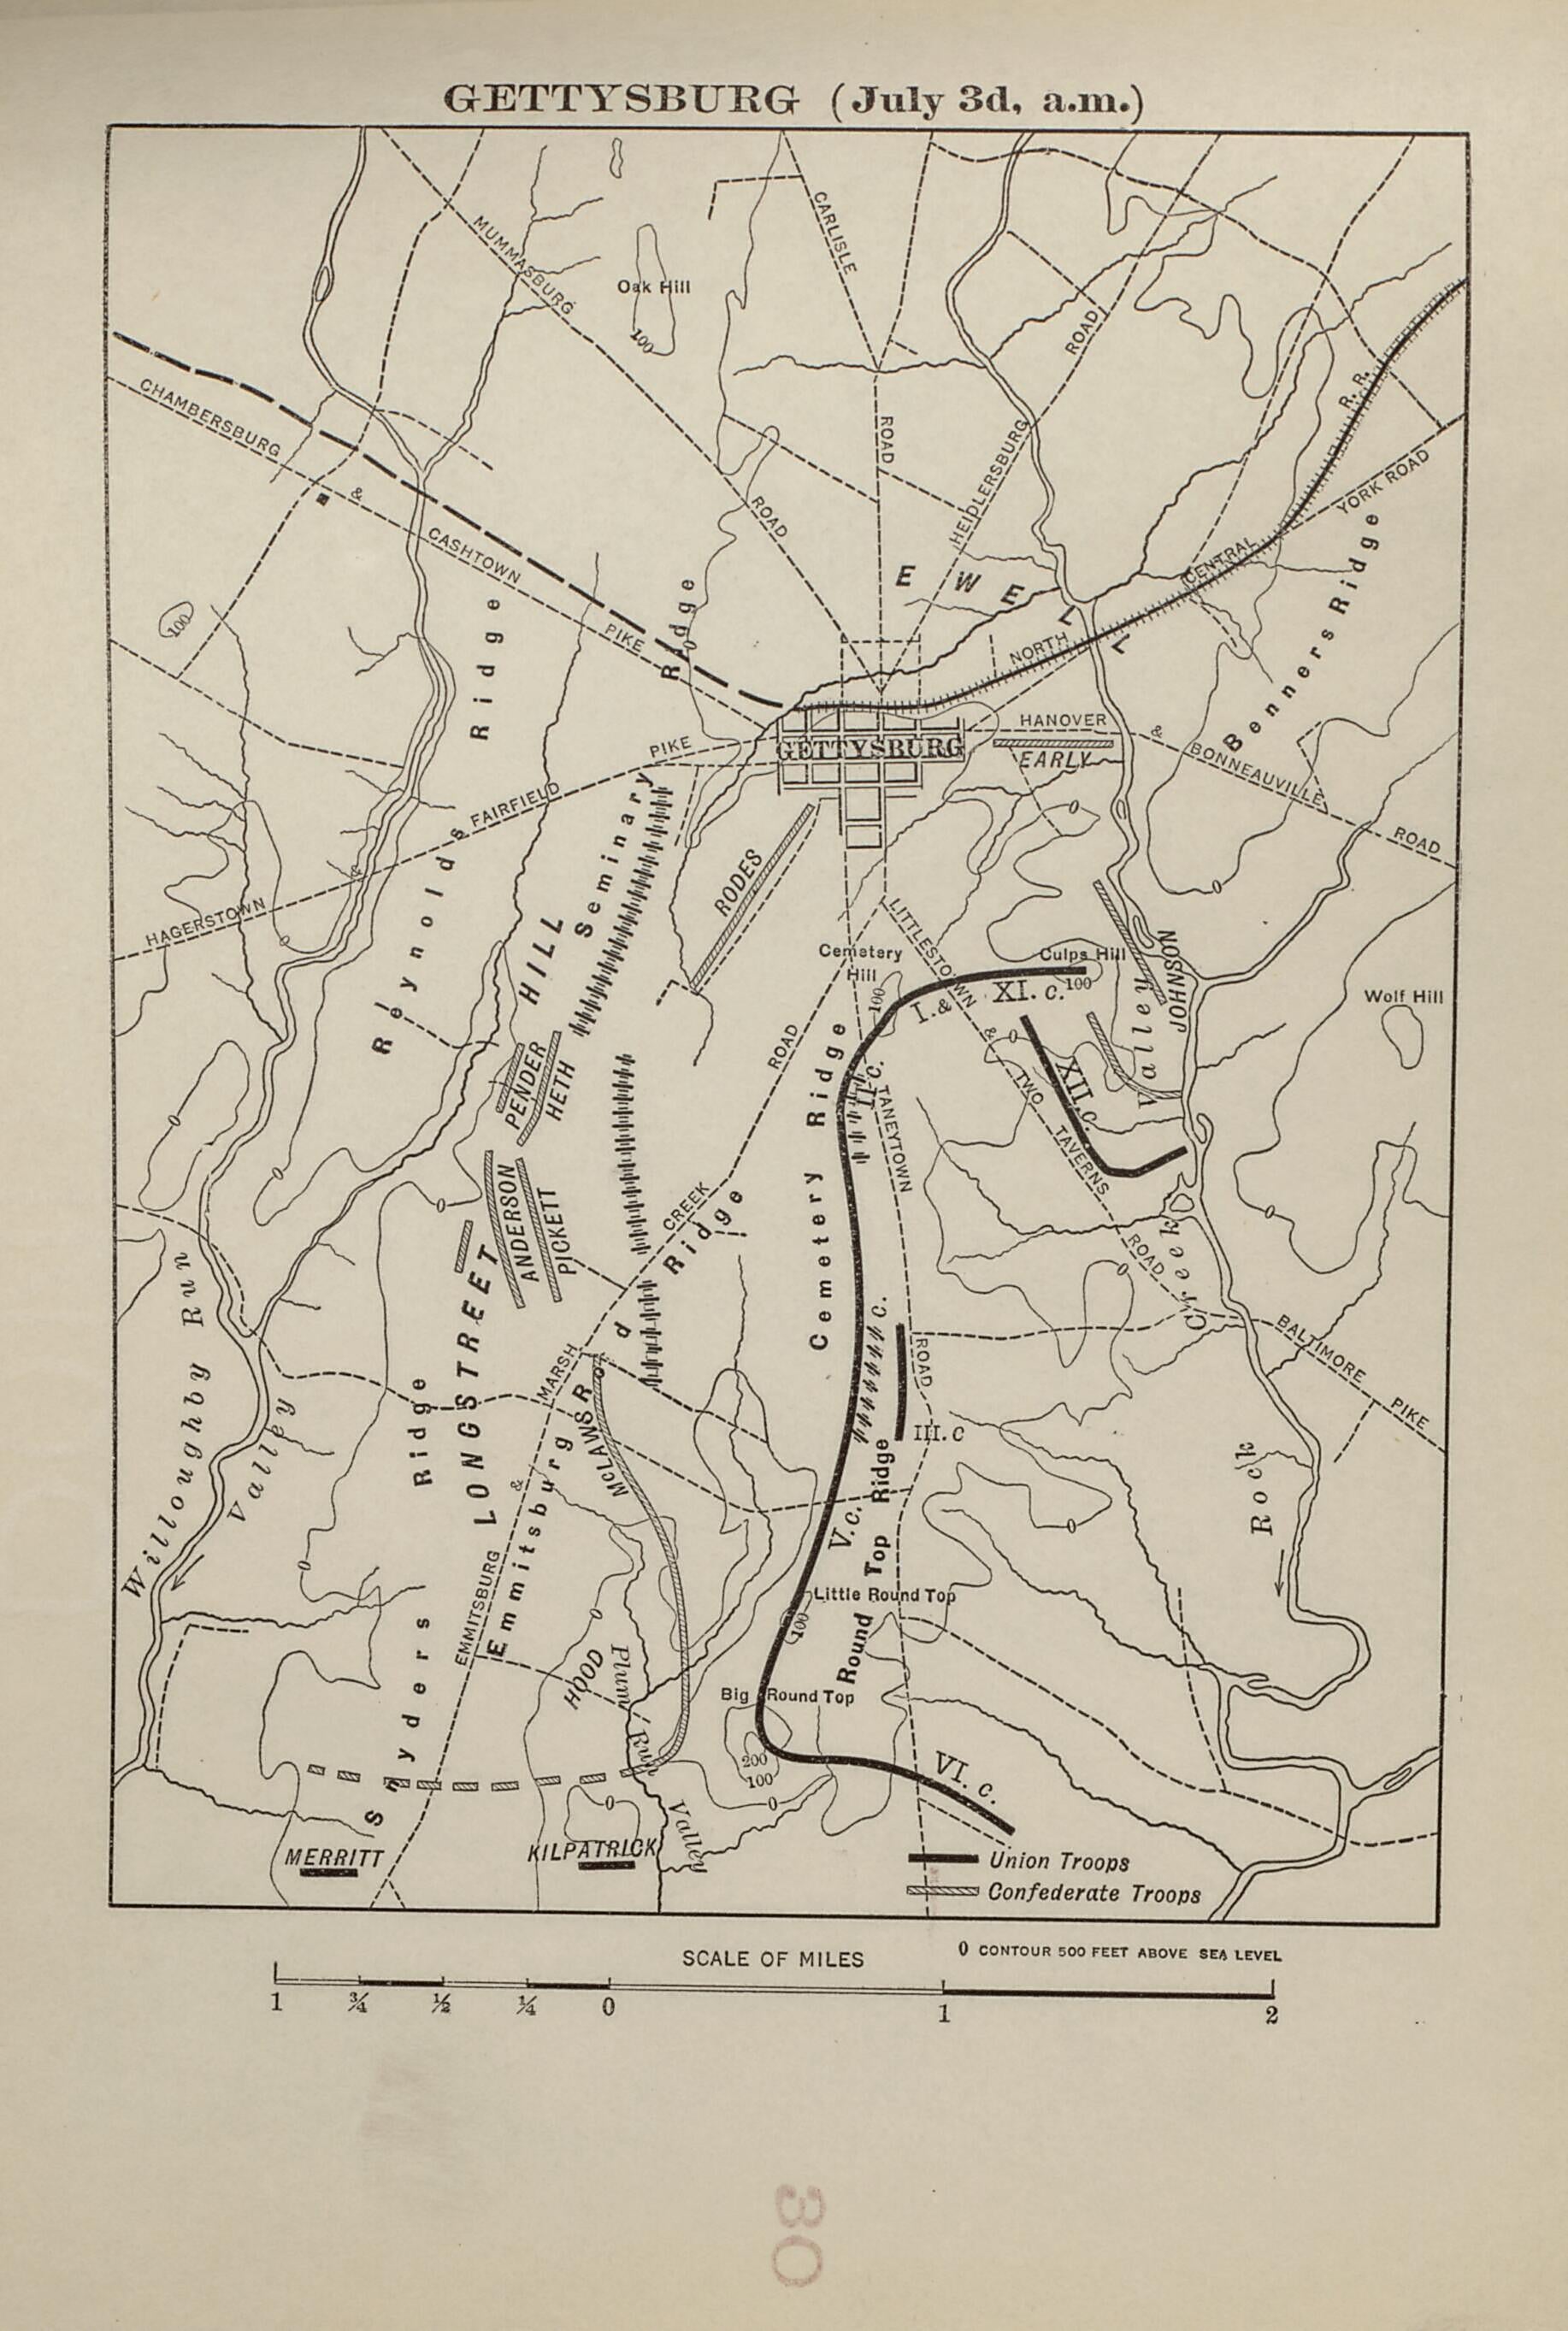 This old map of Gettysburg (July 3d A.m.) from American Civil War Atlas from 1914 was created by G. J. (Gustav Joseph) Fiebeger in 1914